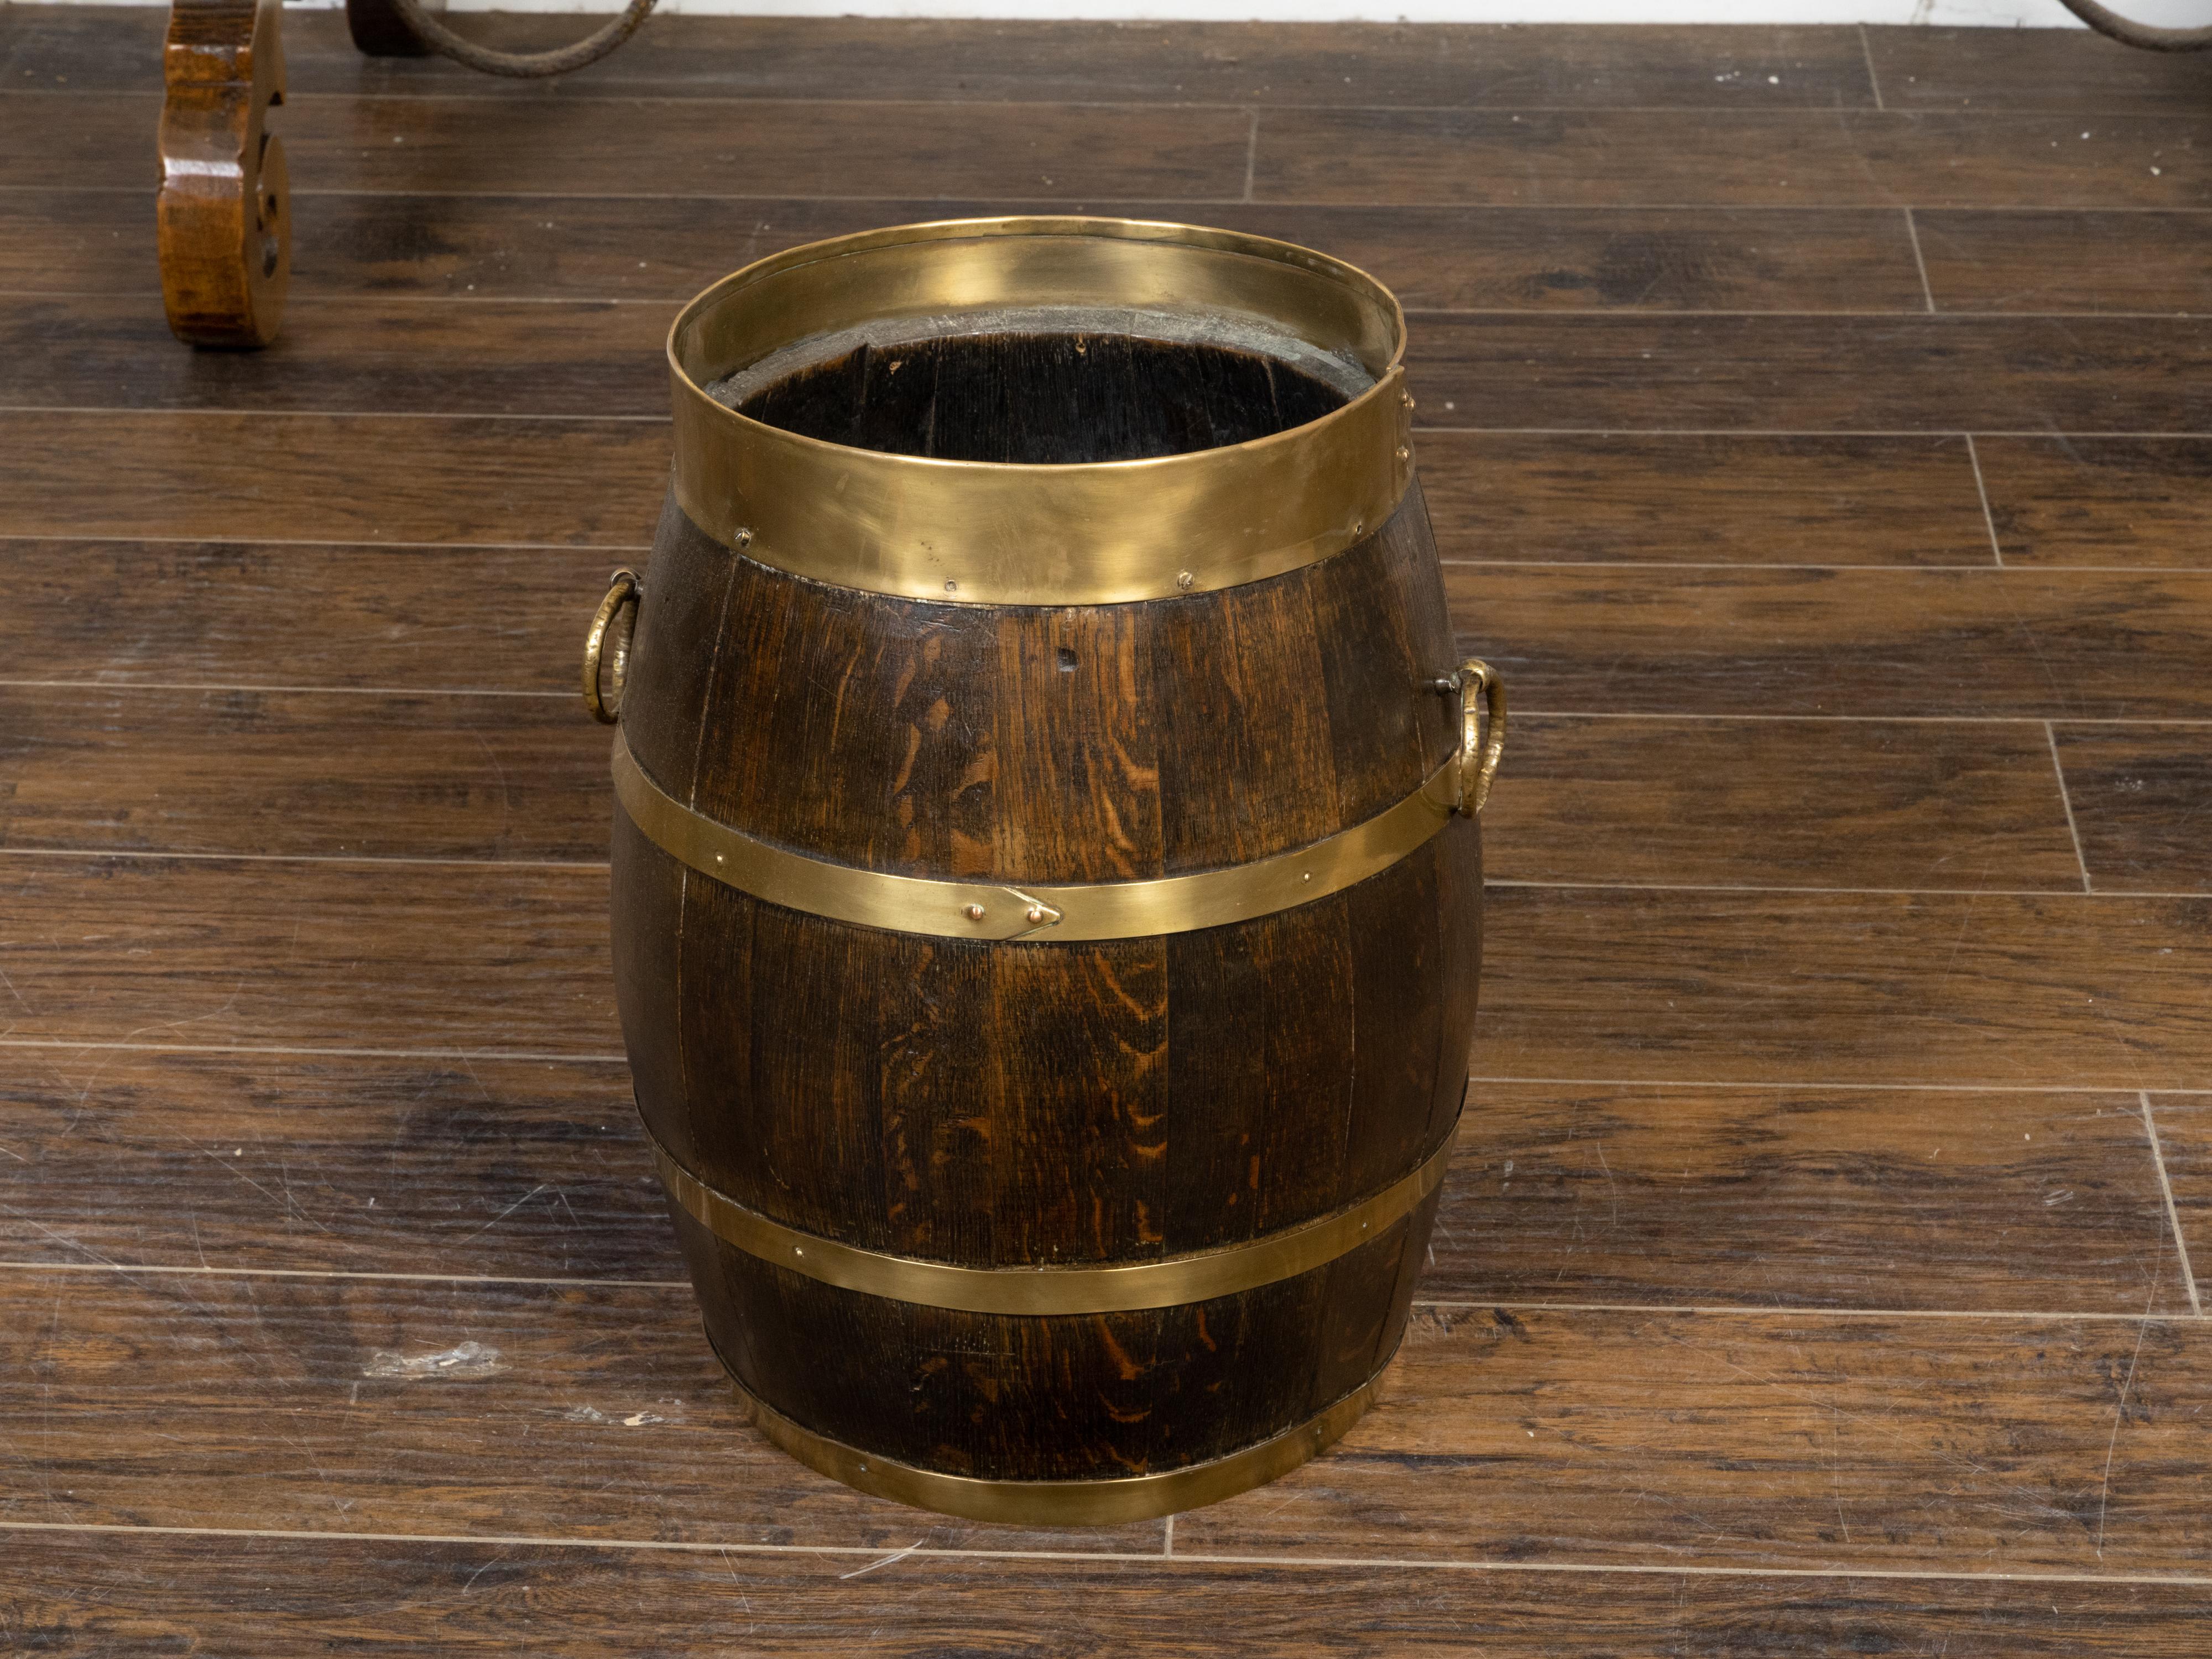 A rustic English turn of the century oak barrel from the early 20th century, with brass braces, and ring handles. Created in England during the Turn of the Century which saw the transition between the 19th to the 20th century, this barrel features a